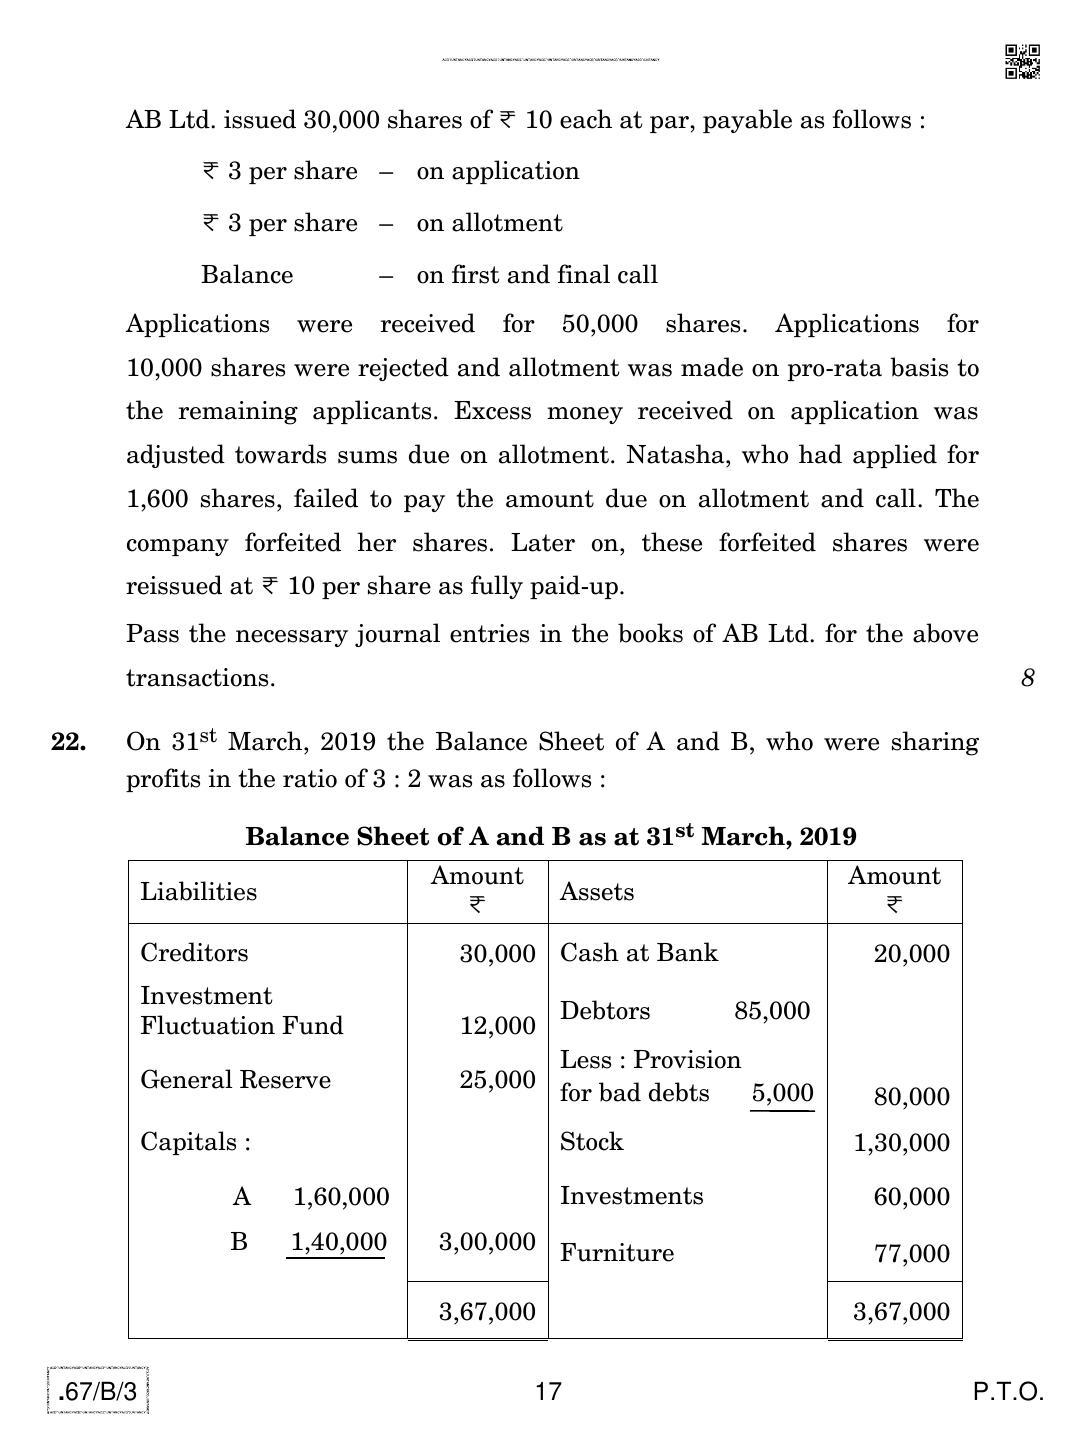 CBSE Class 12 67-C-3 - Accountancy 2020 Compartment Question Paper - Page 17